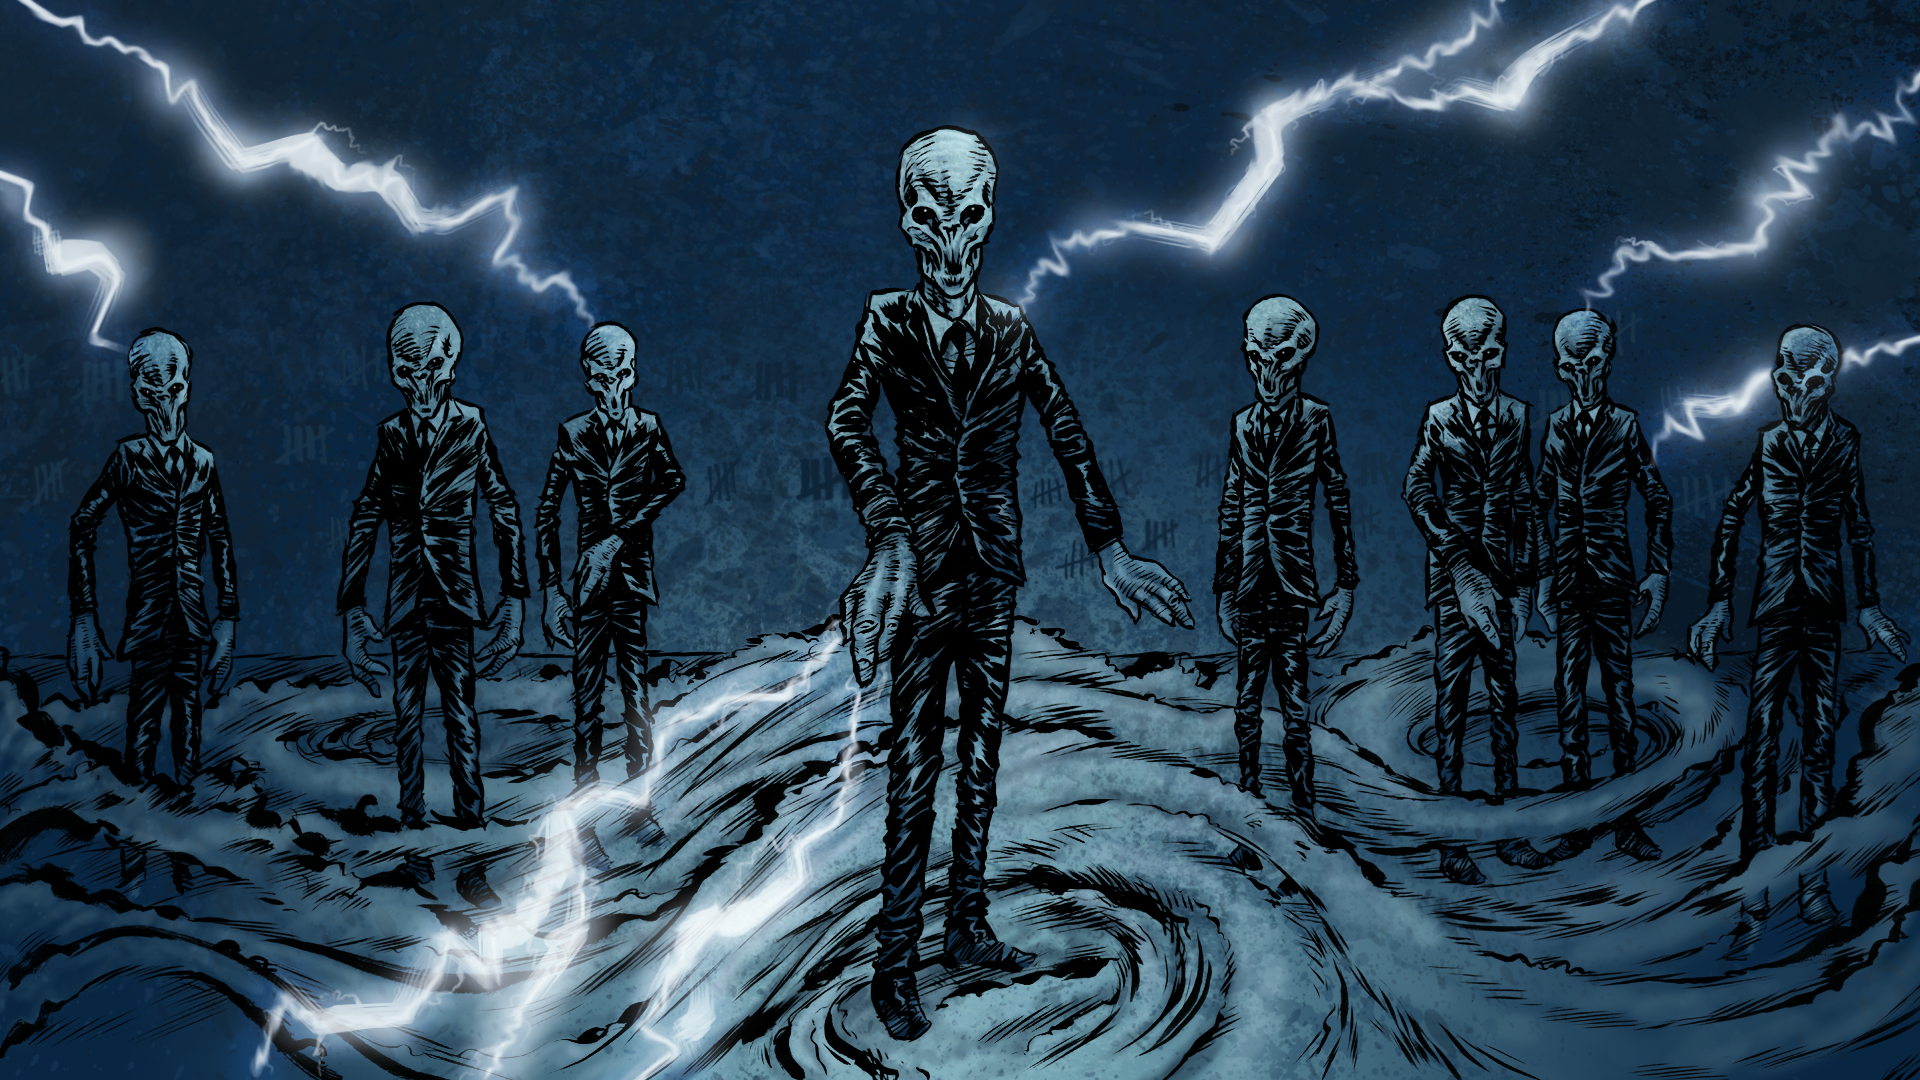 General 1920x1080 skull aliens lightning suits Doctor Who TV series The Silence frontal view science fiction